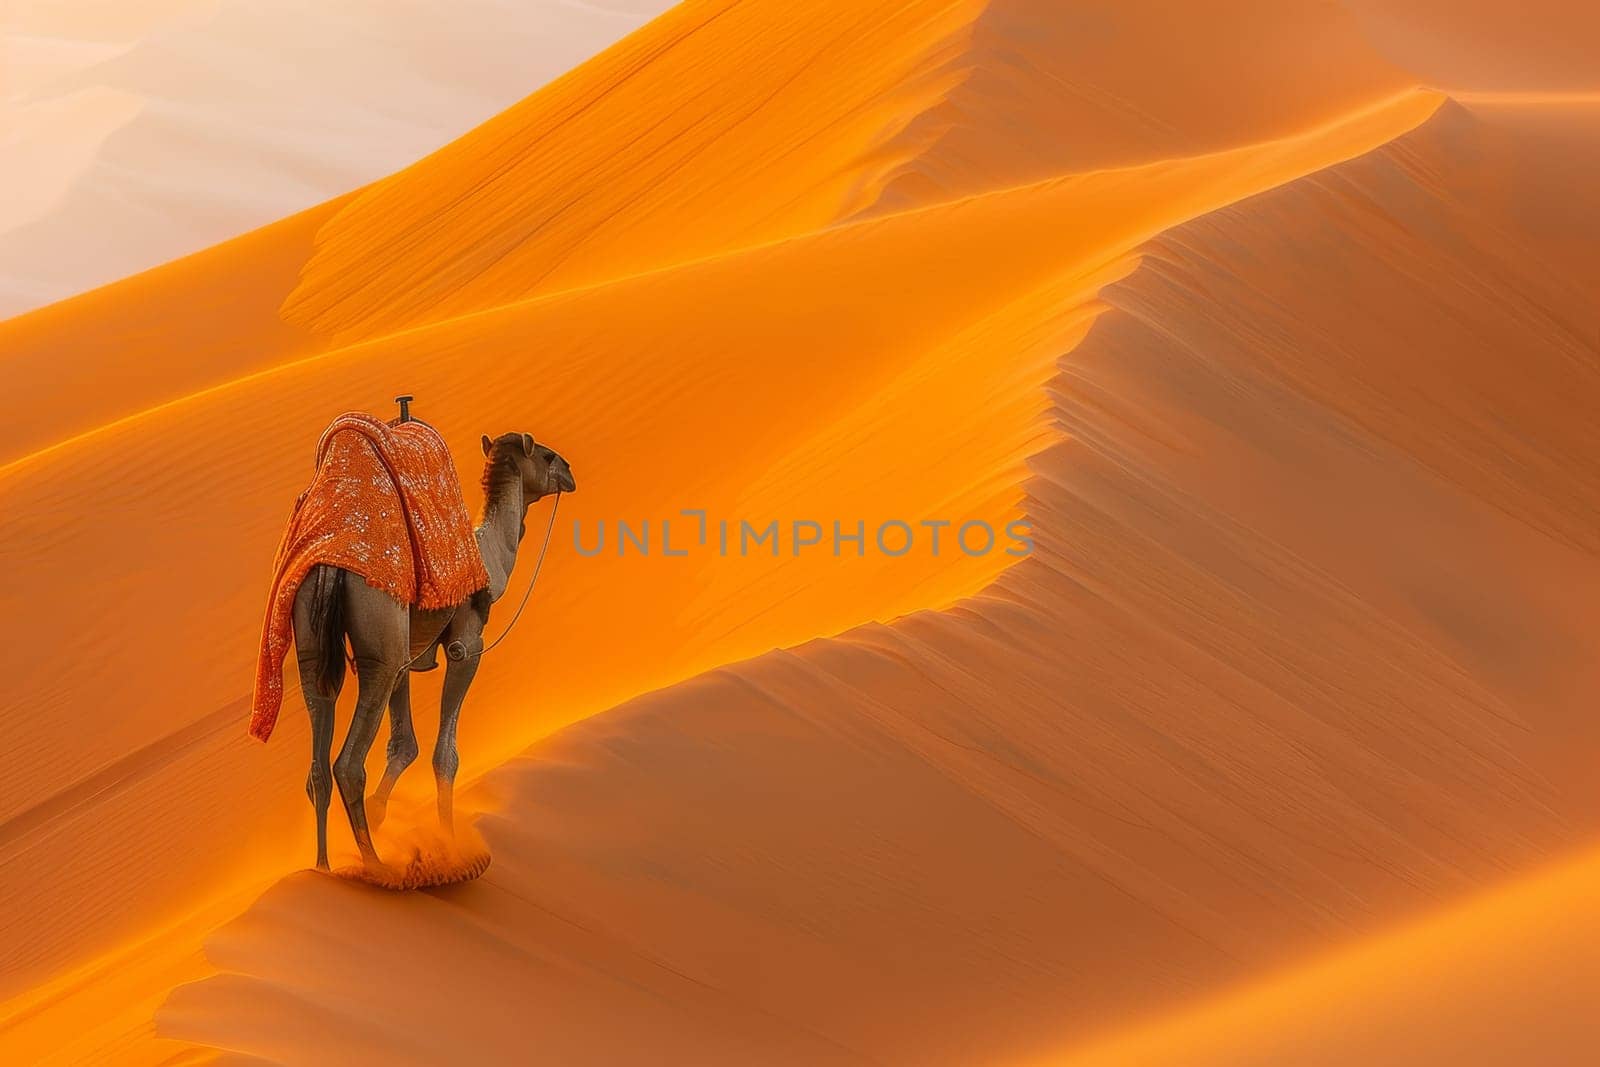 A camel is walking across a sandy desert with a red blanket on its back by itchaznong